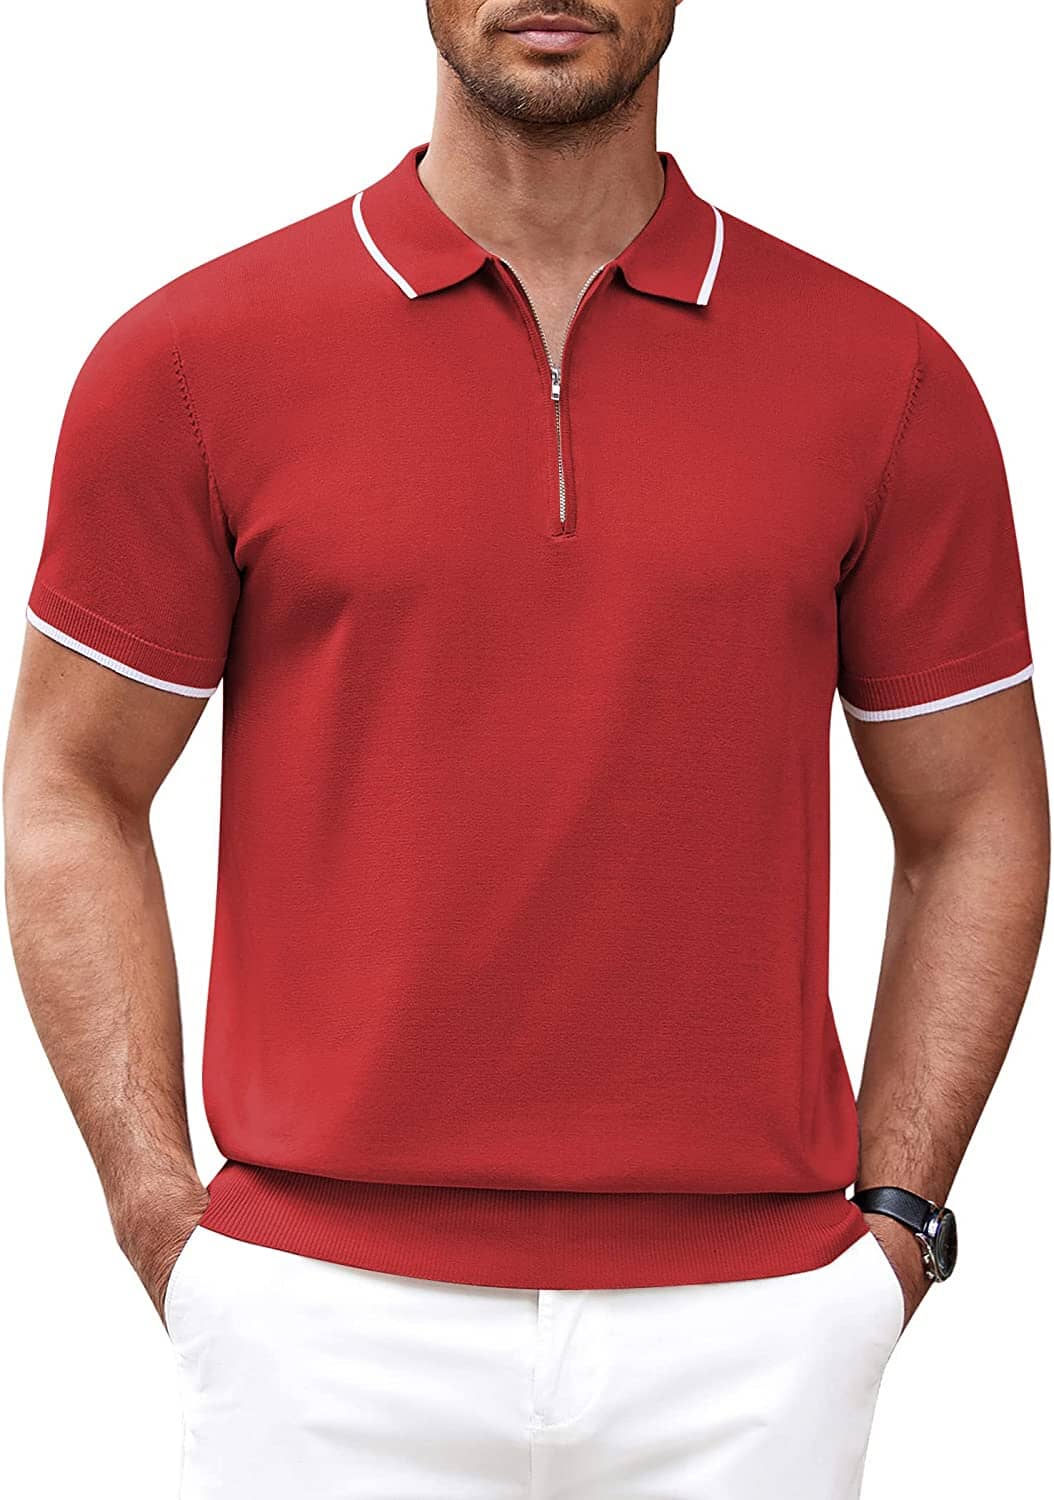 Classic Zipper Short Sleeve Polo Shirt (US Only) Polos COOFANDY Store Red S 